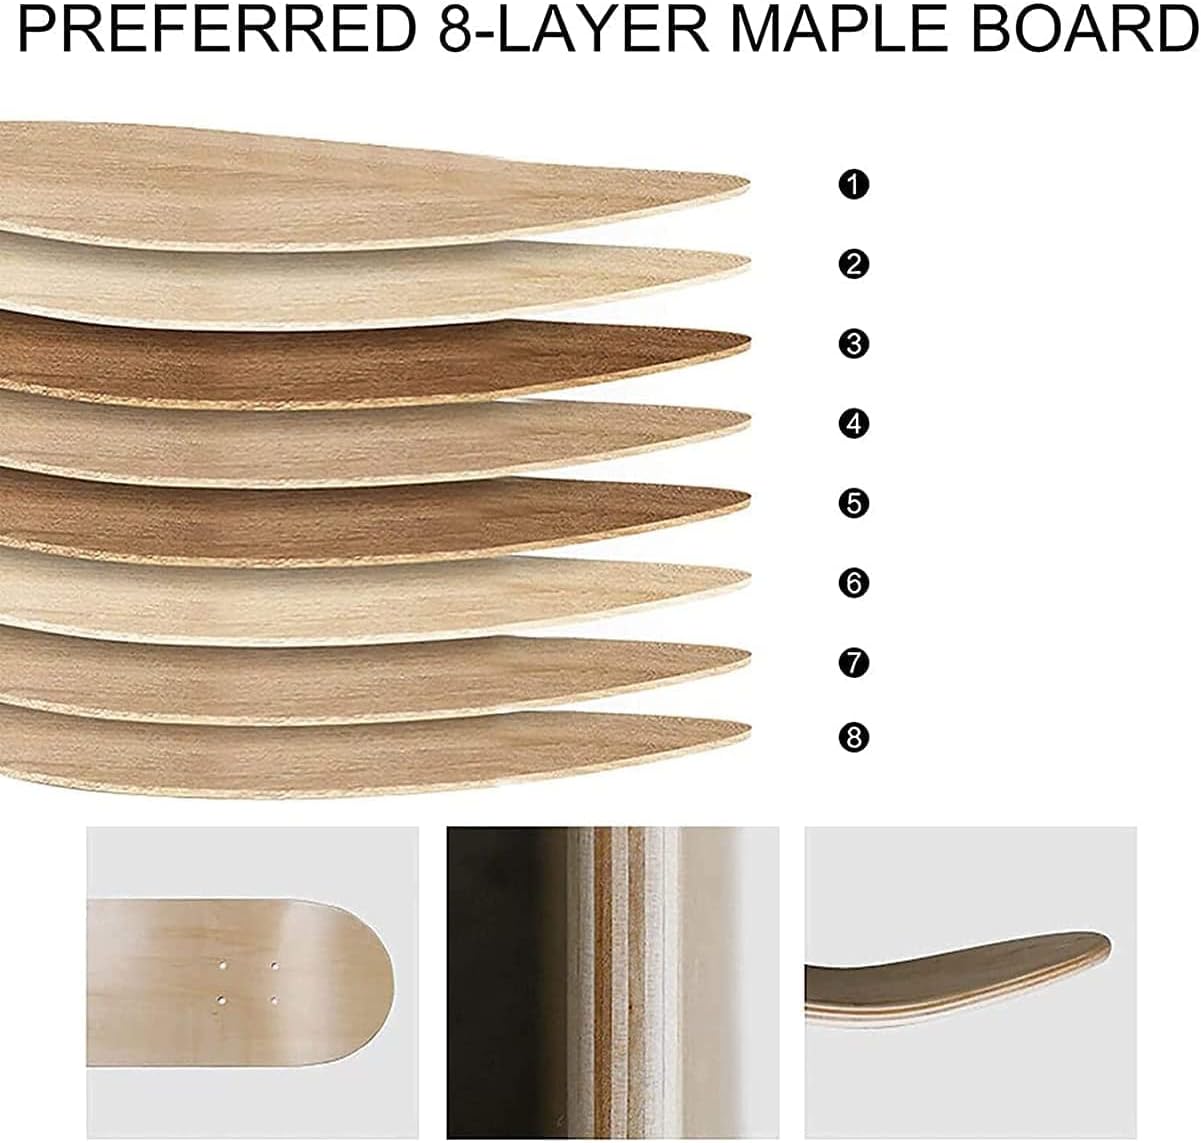 31IN Longboard Skateboards - Mini Long Boards for Adults, Teens and Kids. 9 Layer Canadian Maple Deck Concave Skateboard